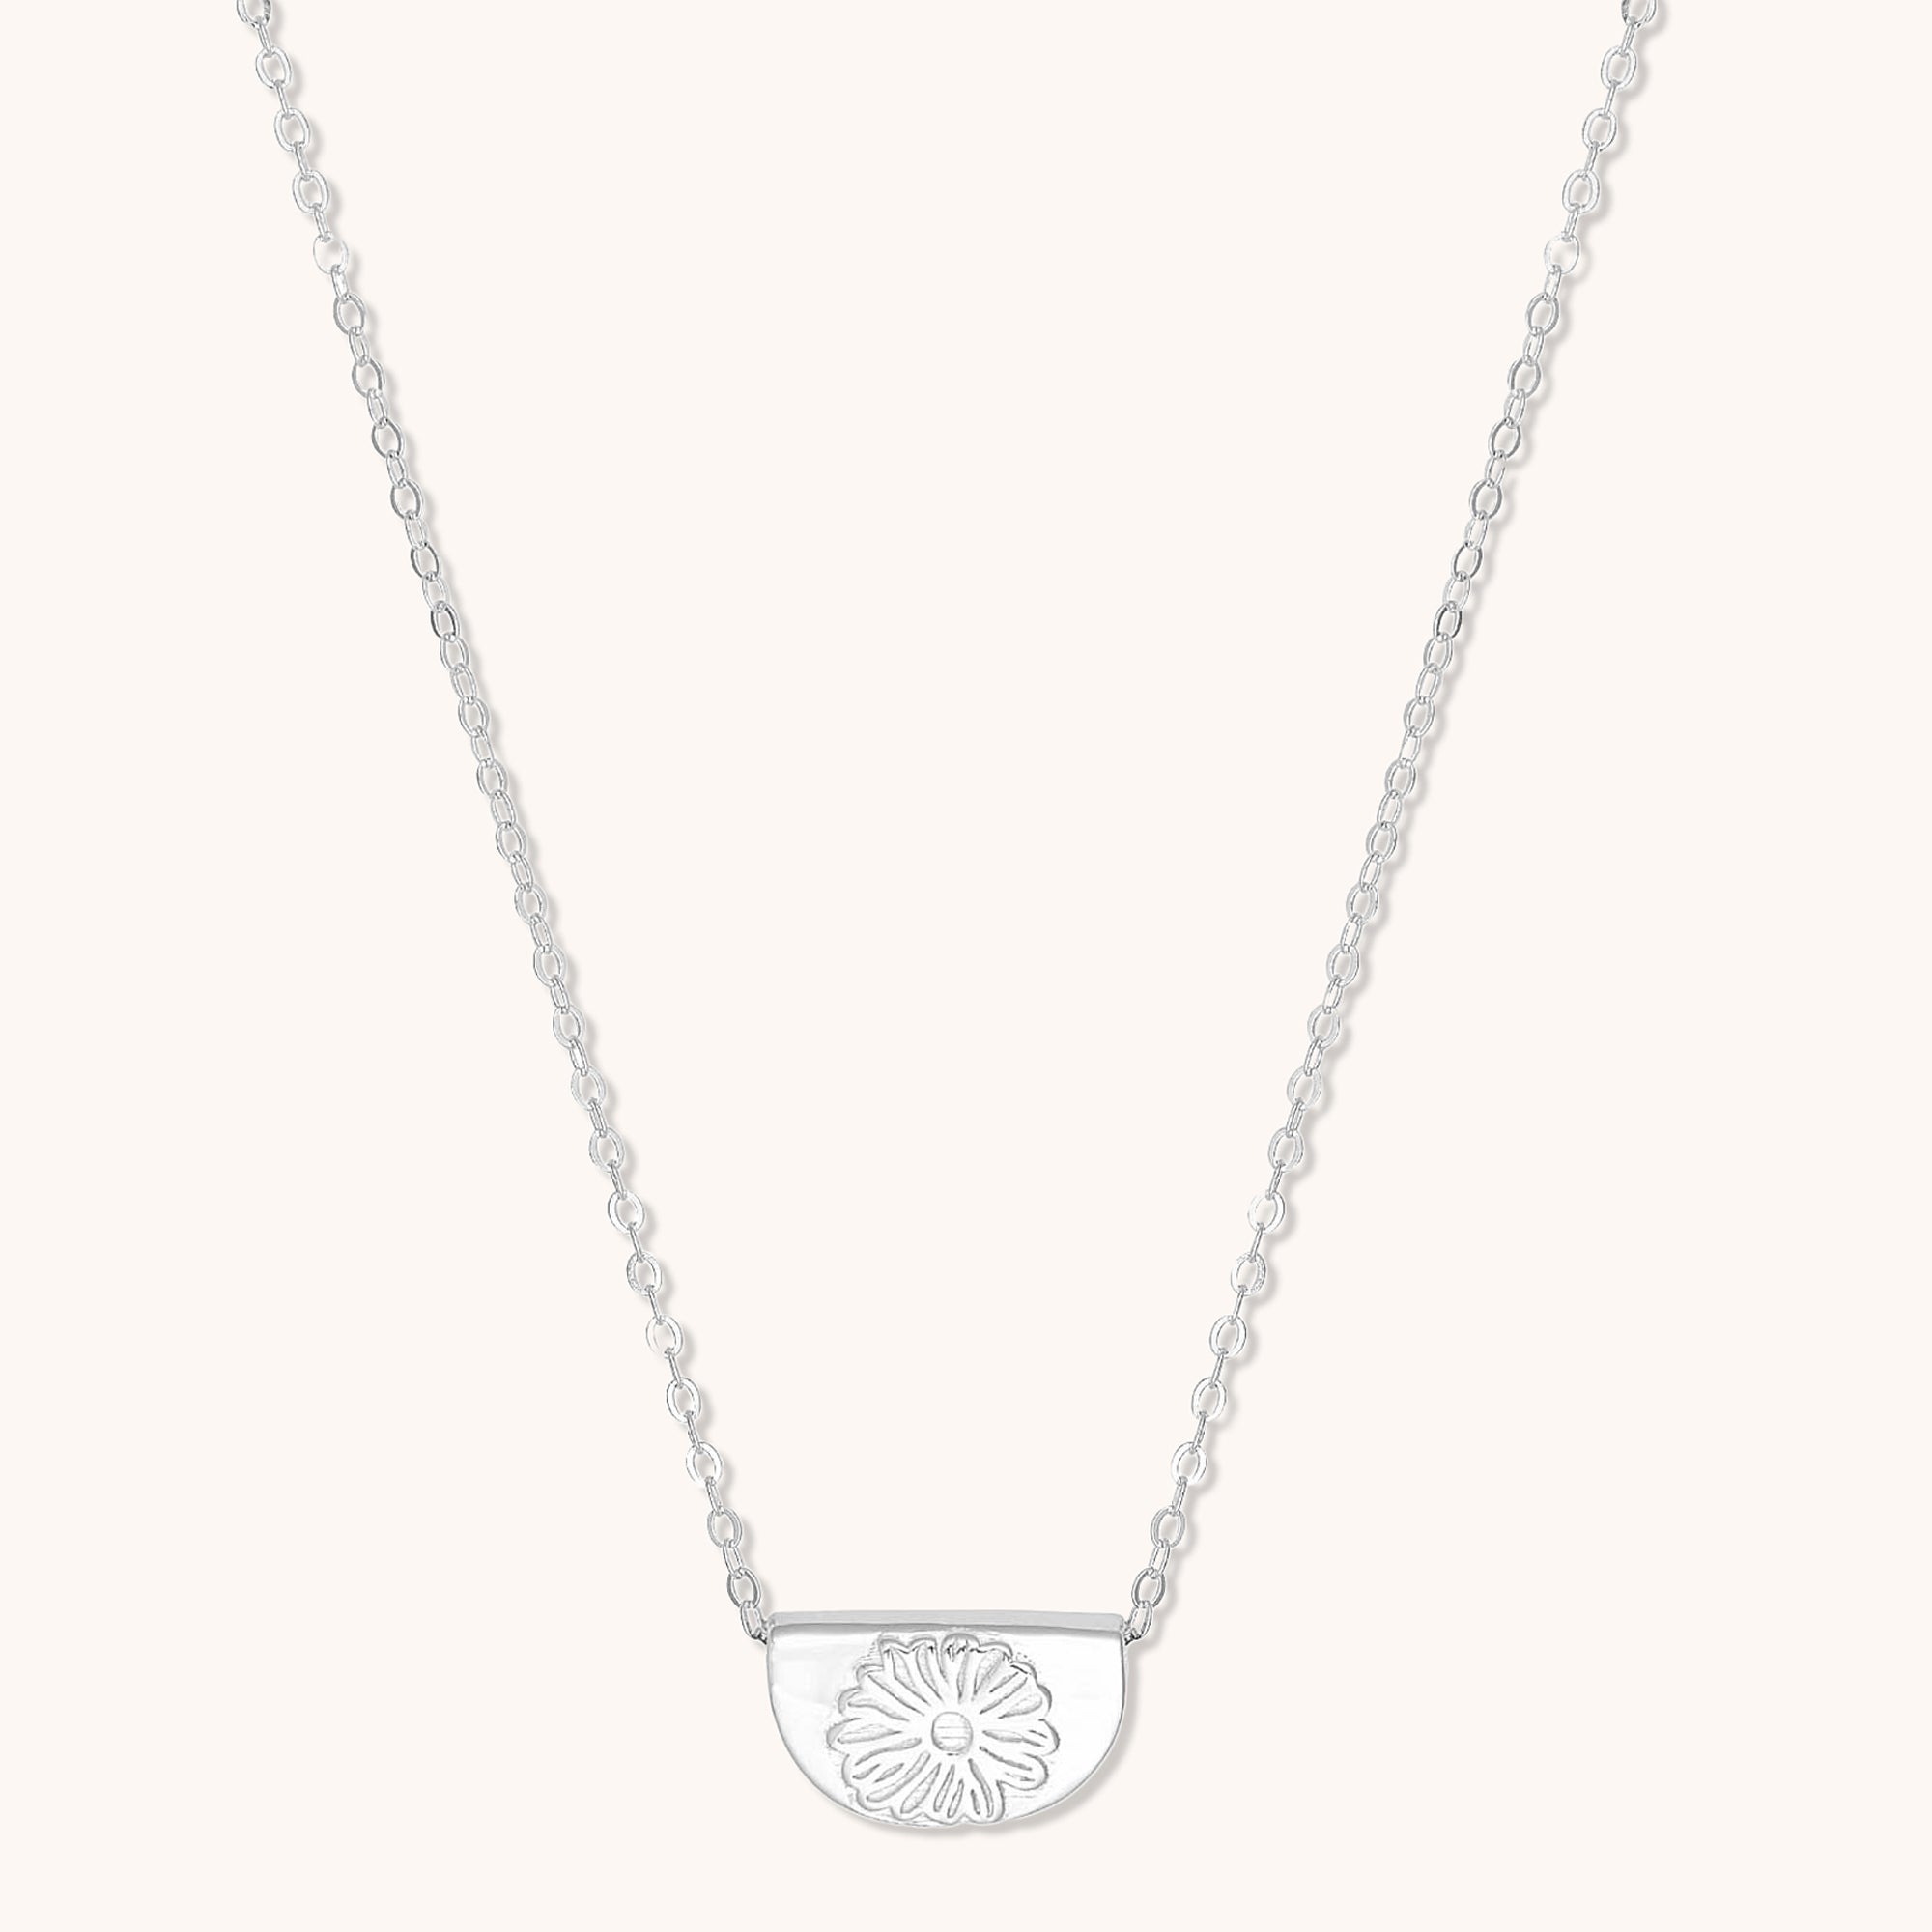 Birth Flower Necklace April (Daisy) Silver